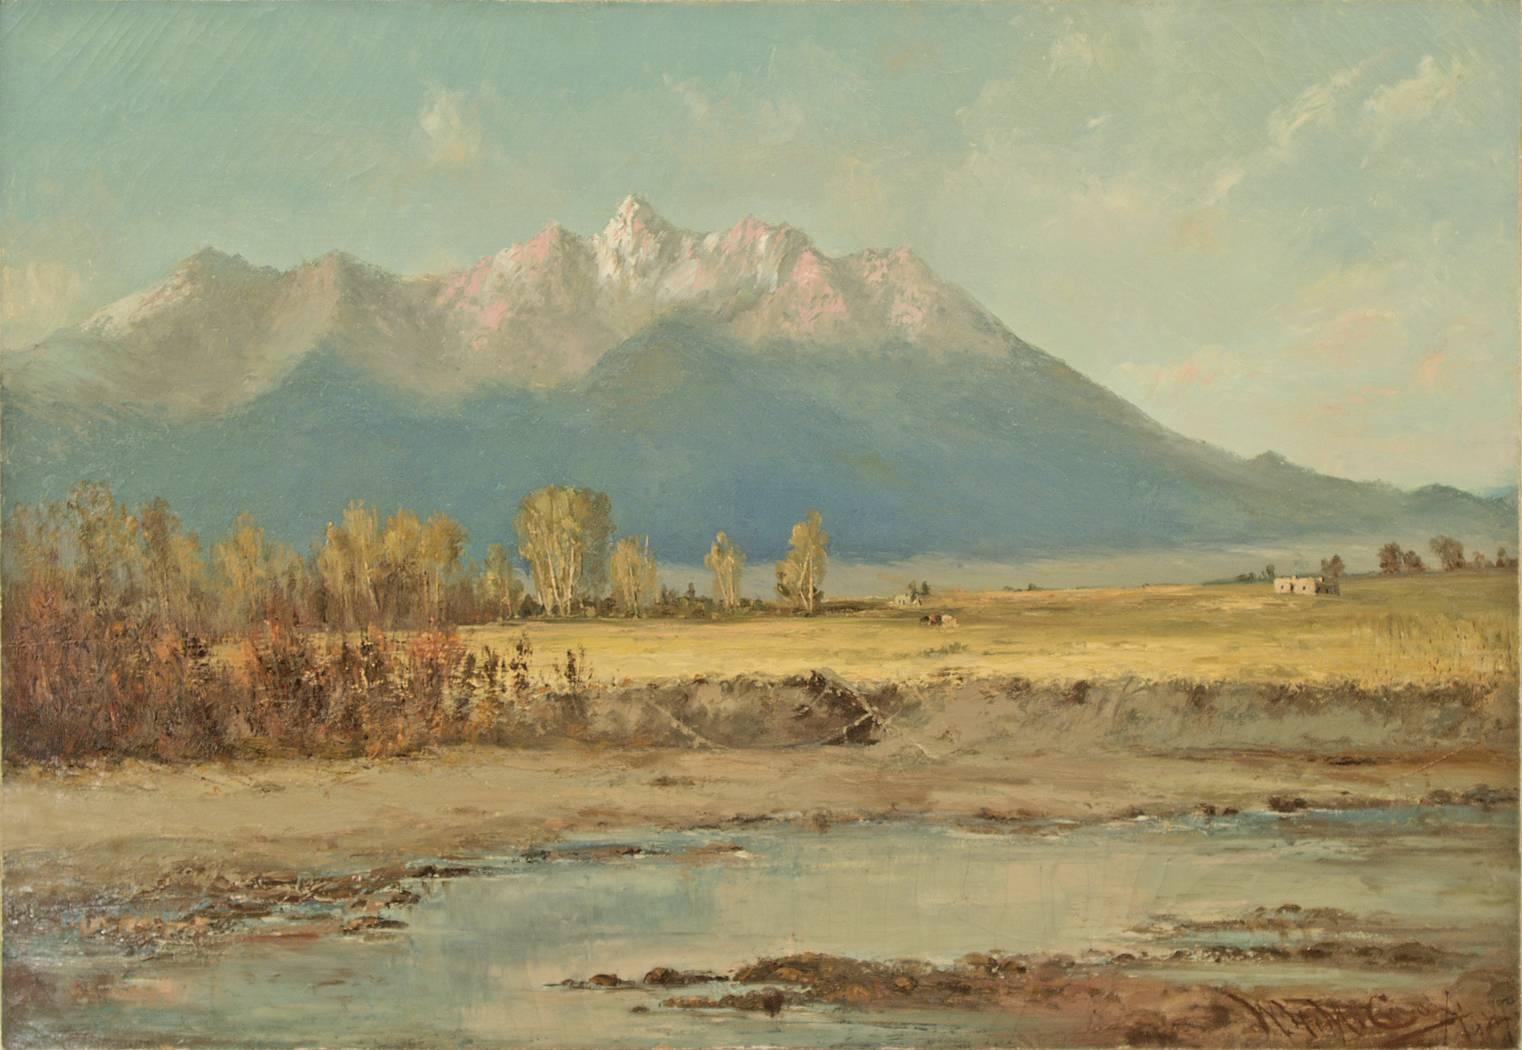 Untitled (Blanca Peak and Little Bear, Sangre de Cristo Mountains, Colorado) - Painting by William H. M. (Coxe) Cox